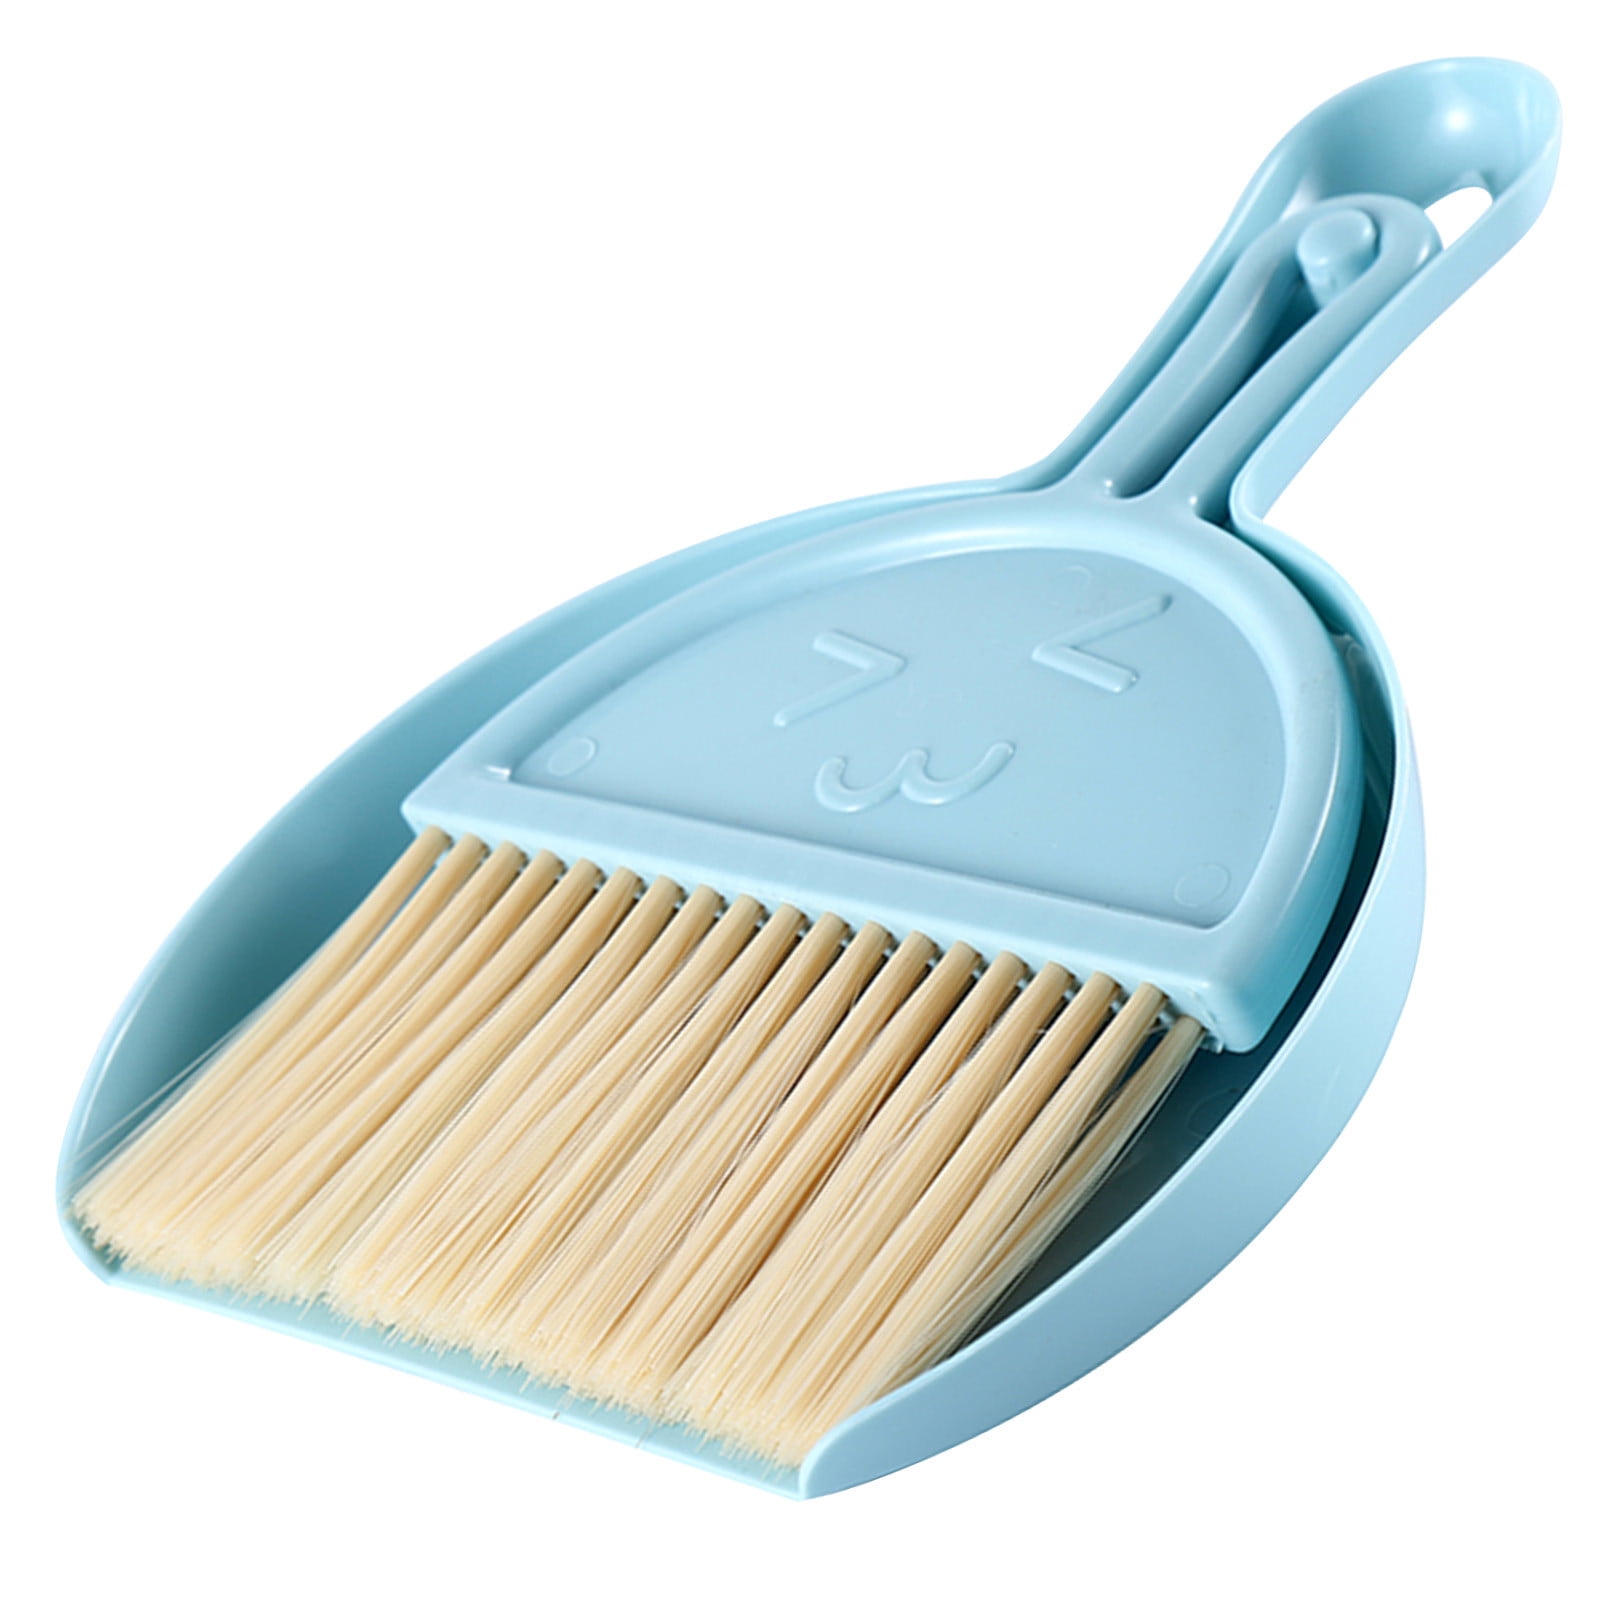 Mini Dustpan Brush Set Multi Function Home Mini Broom Dustpan Portable Dust Pan Brush Kit Small Items Cleaning Tool with Straight Handle for Key Board Countertop Blue 1pc 